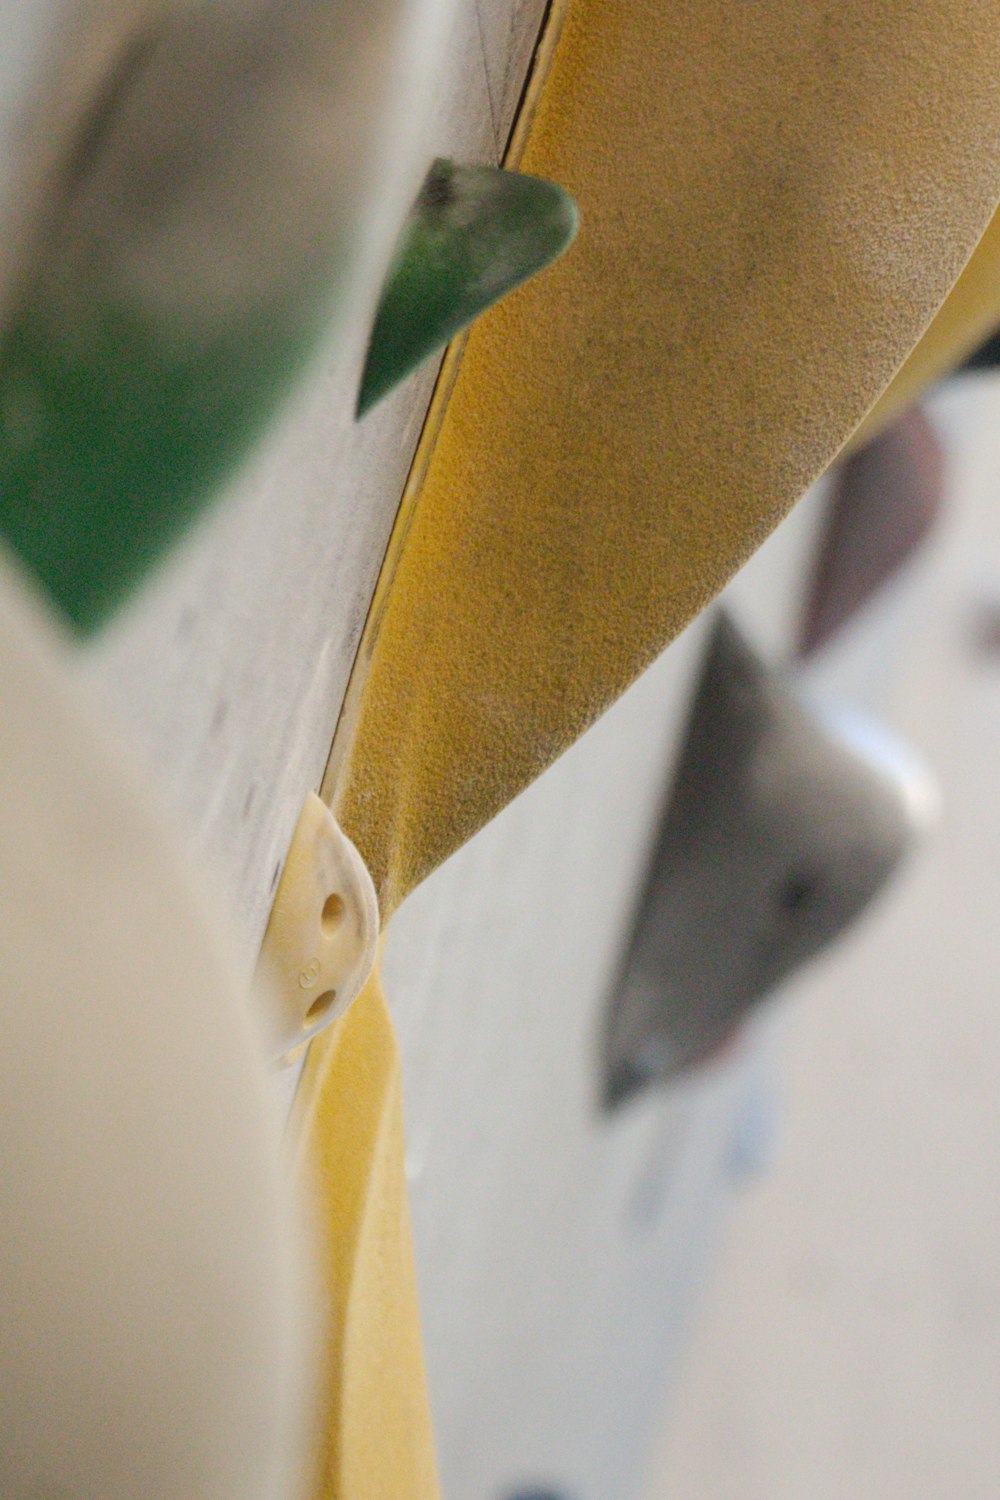 a close up of a banana peel with other objects in the background